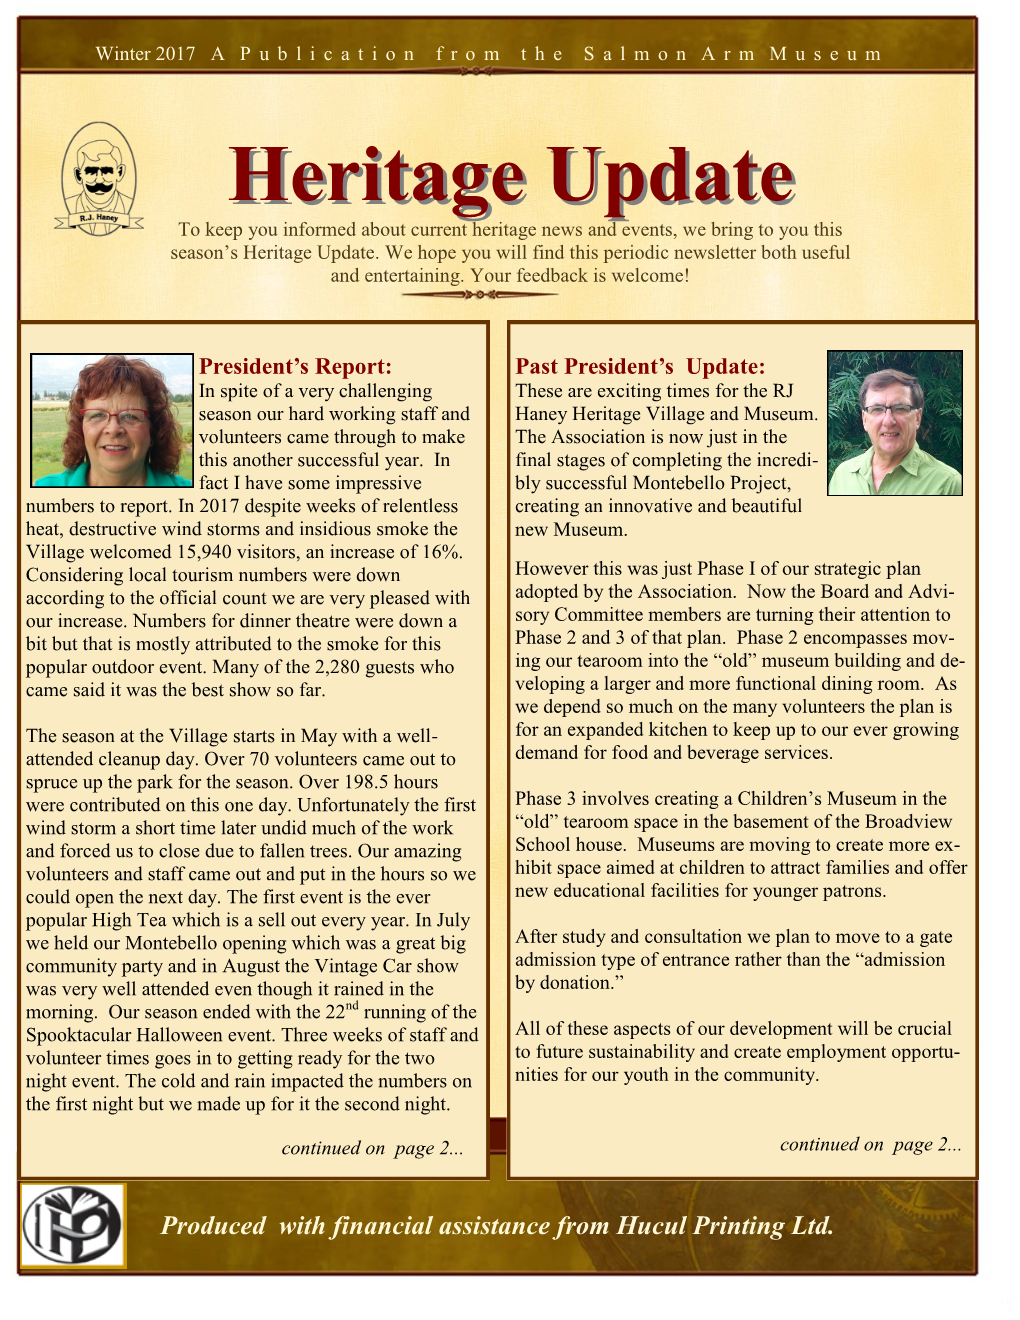 Heritage Updateupdate to Keep You Informed About Current Heritage News and Events, We Bring to You This Season’S Heritage Update